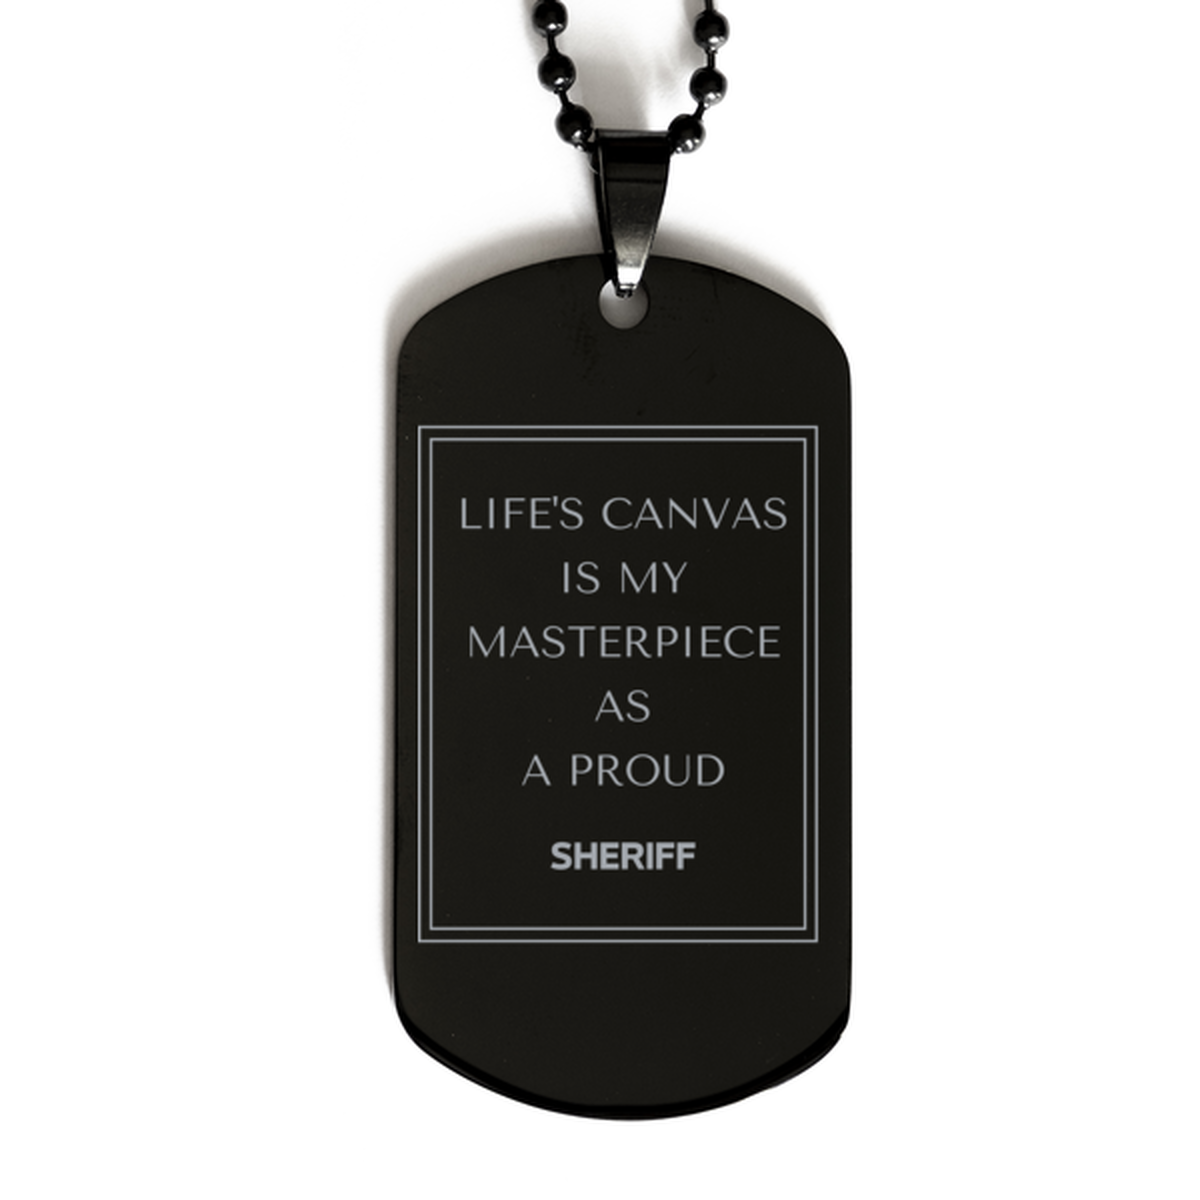 Proud Sheriff Gifts, Life's canvas is my masterpiece, Epic Birthday Christmas Unique Black Dog Tag For Sheriff, Coworkers, Men, Women, Friends